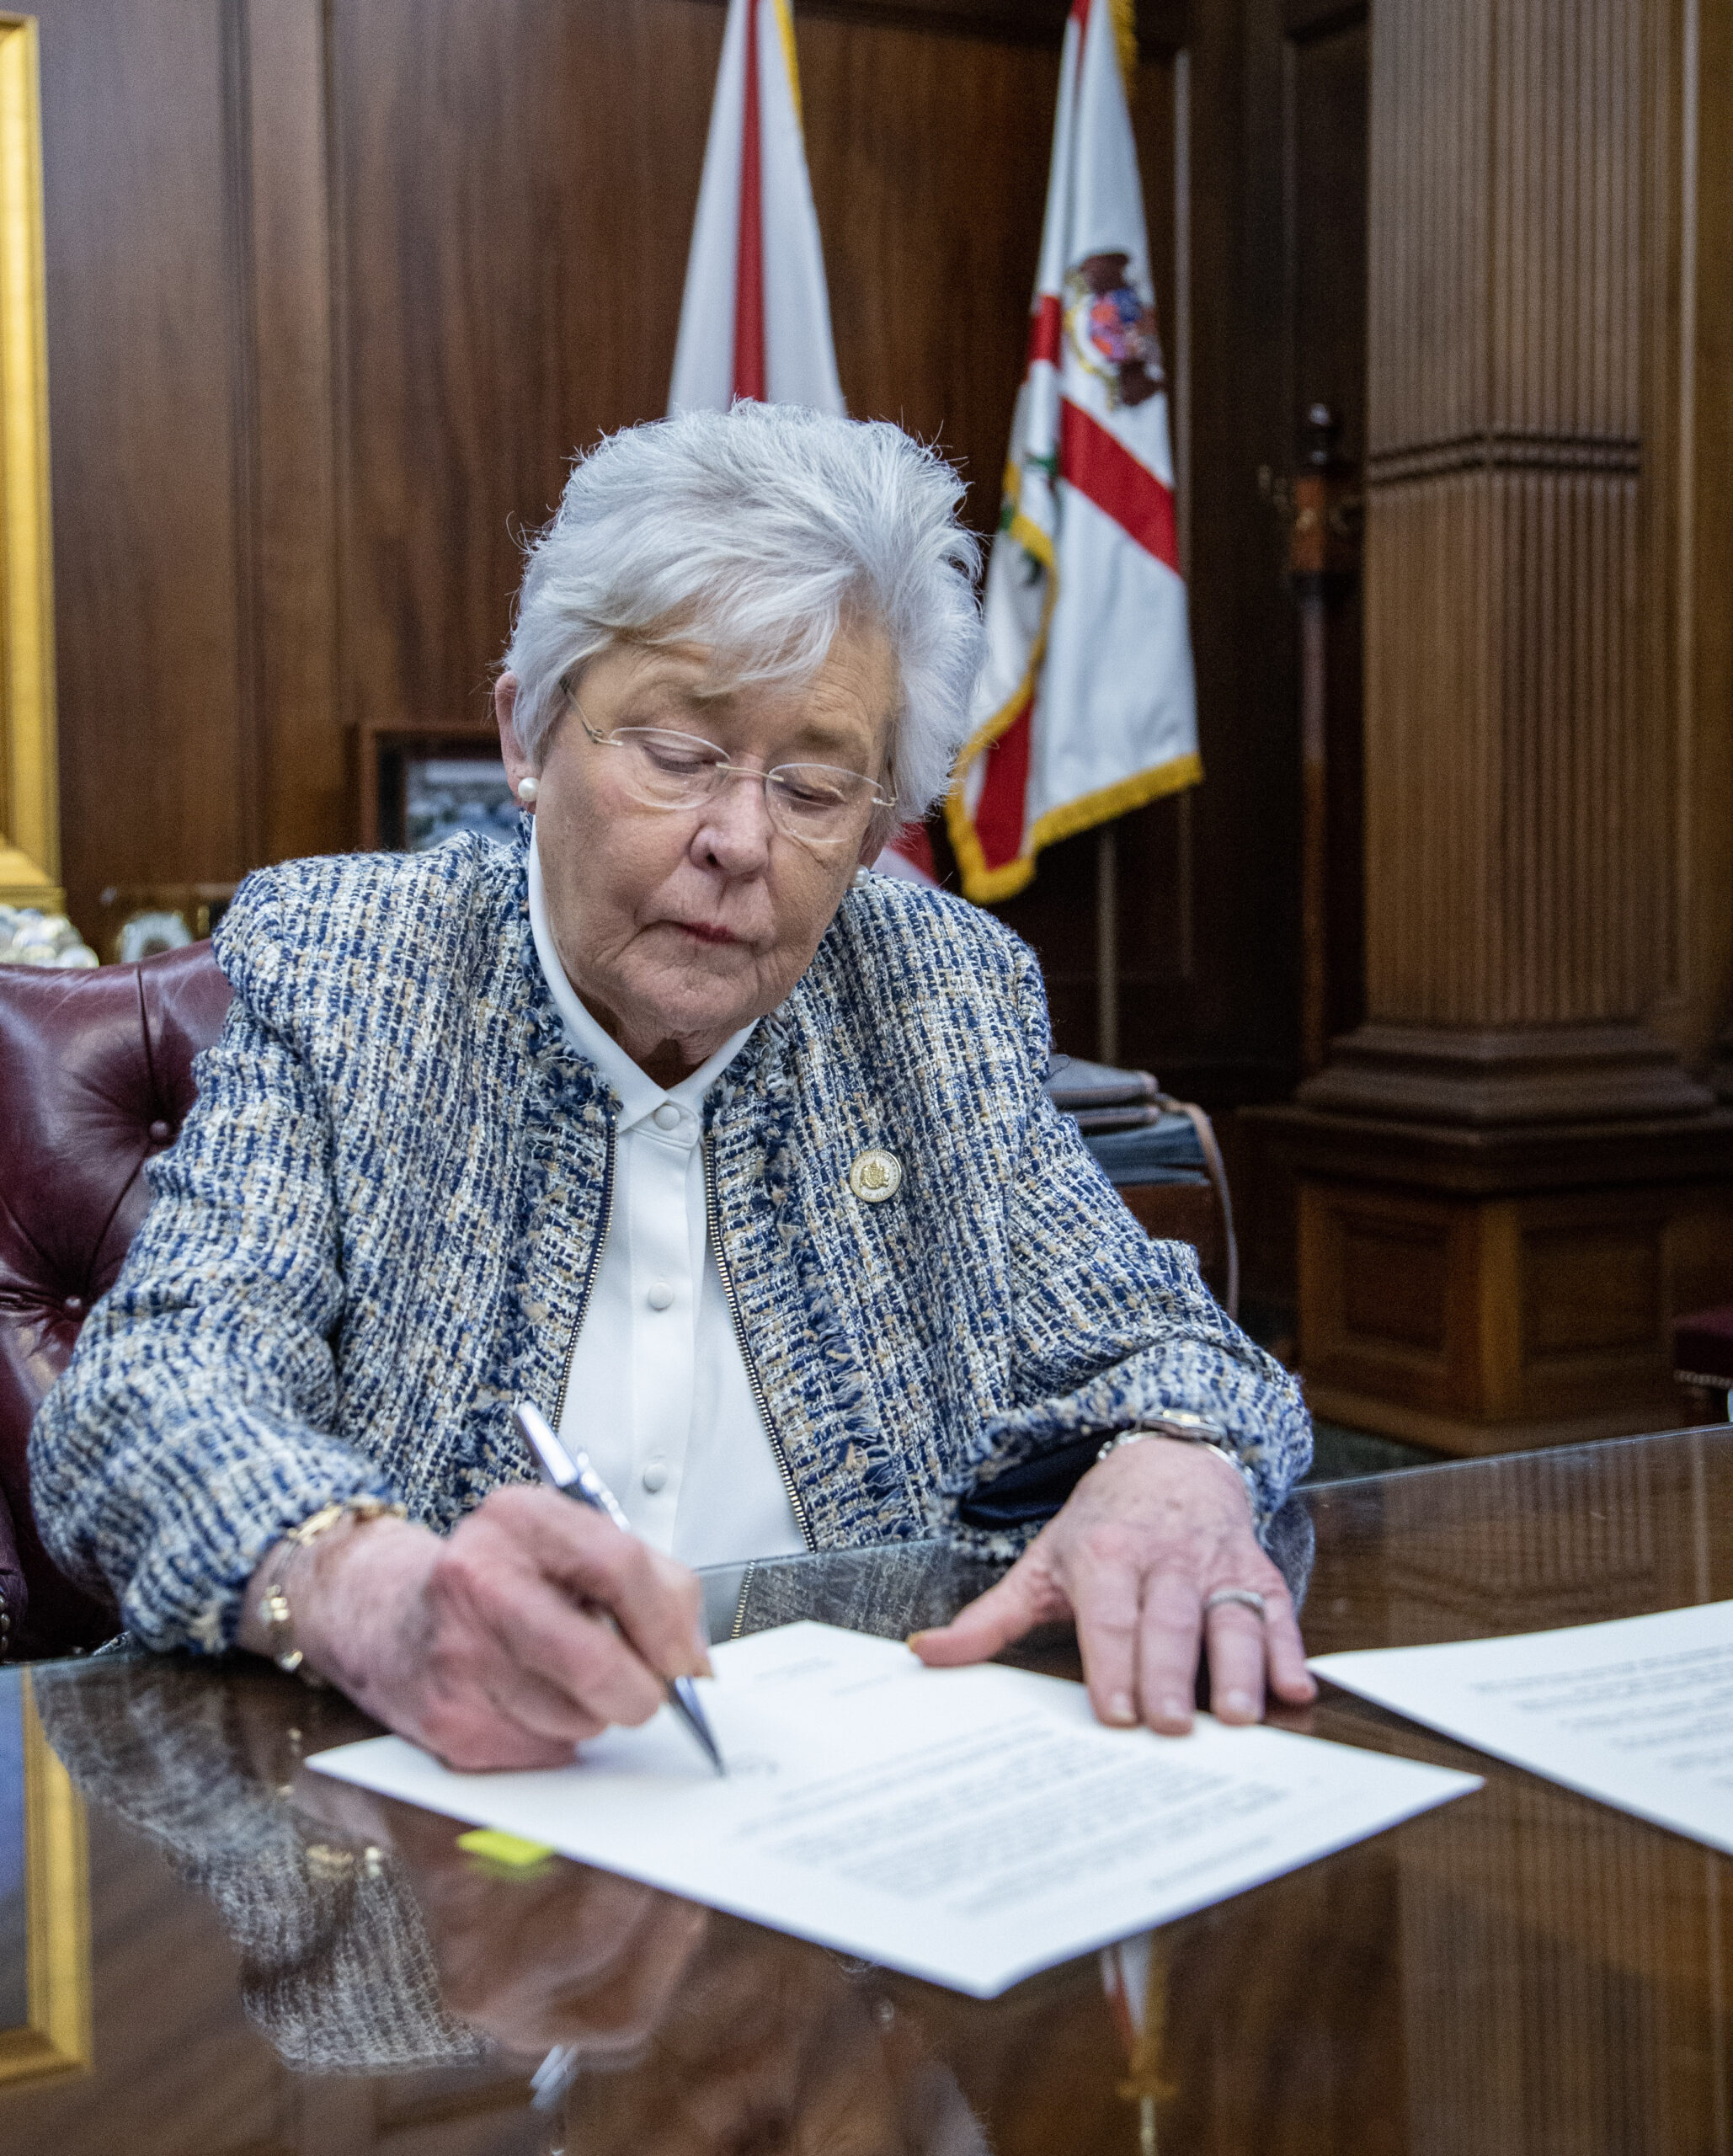 Governor Ivey Issues Executive Order Triad Following Promise for a More Efficient, Accountable and Transparent Government During Inaugural Address